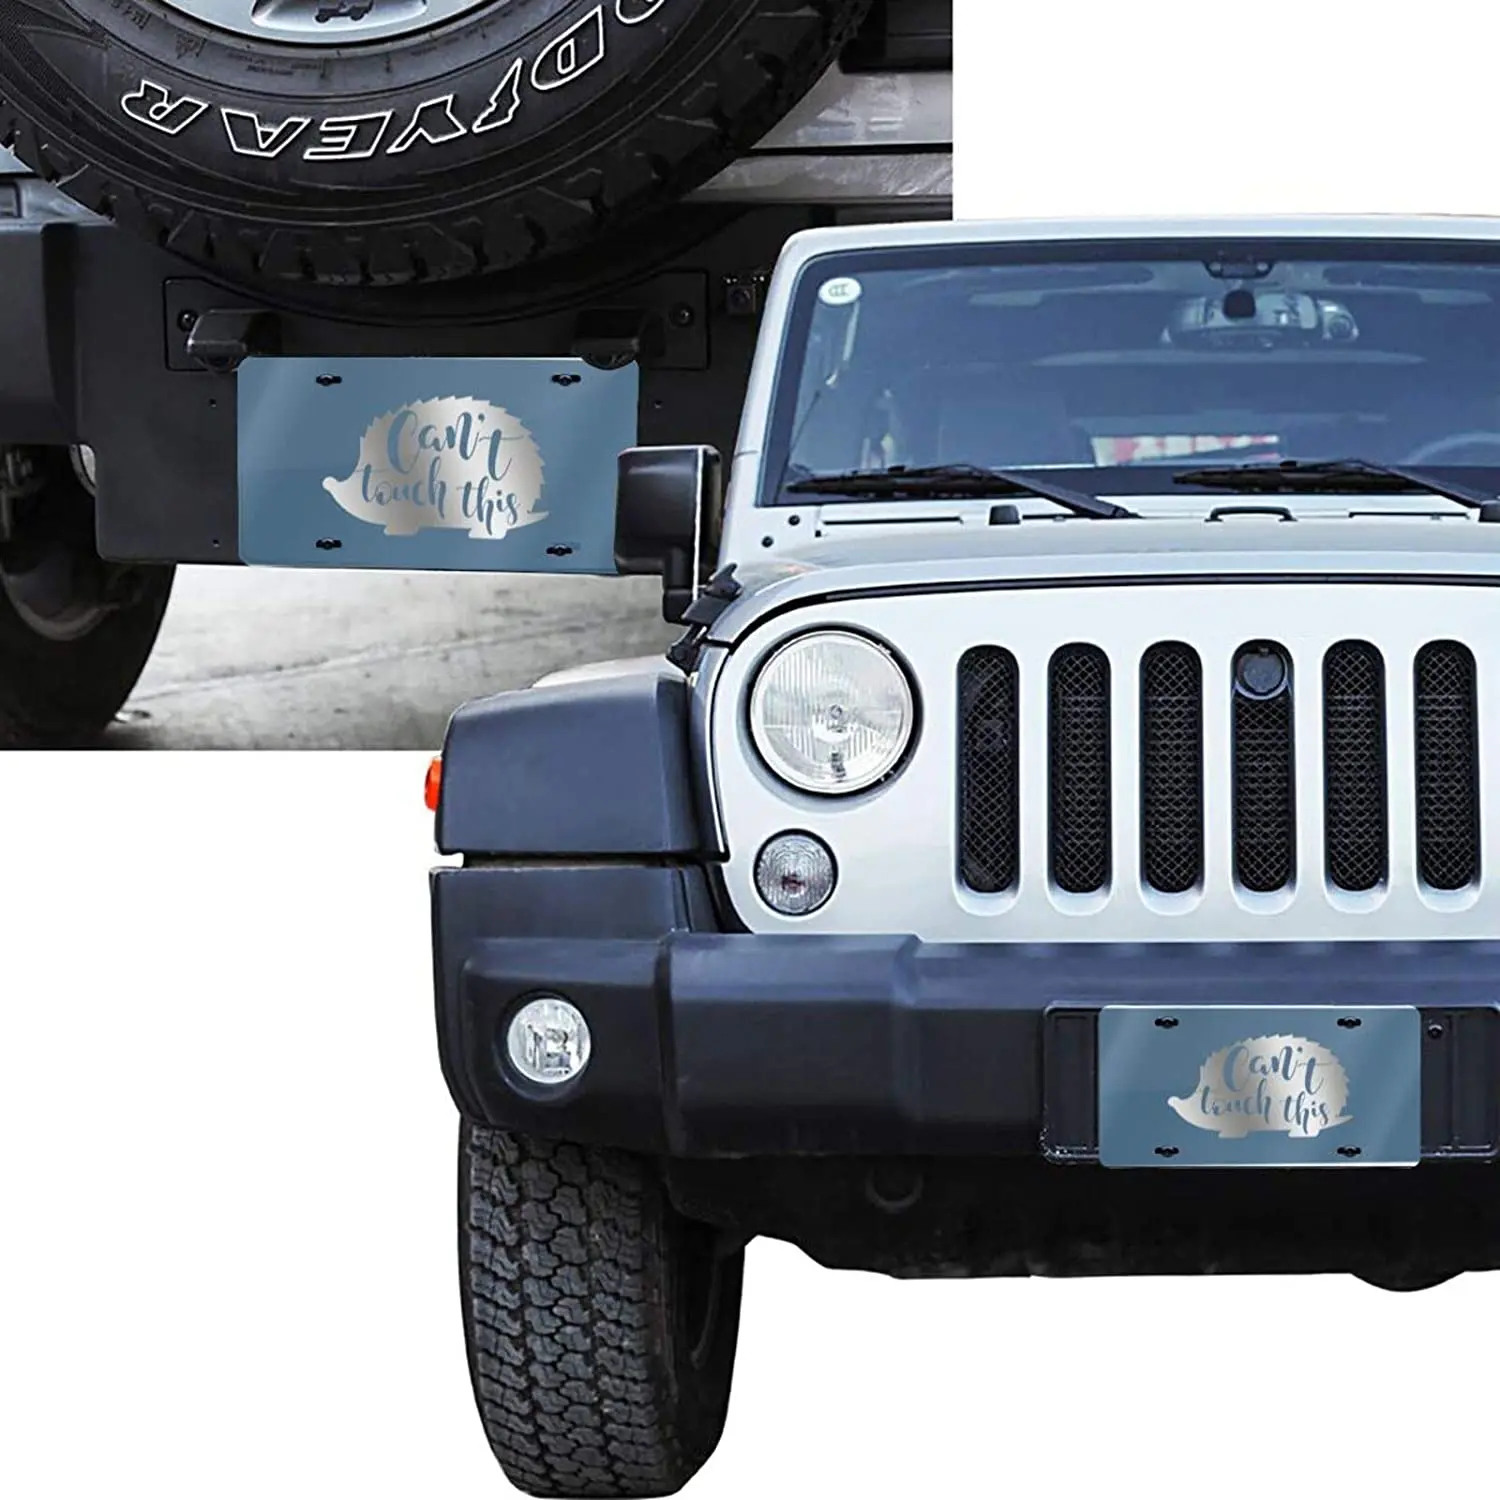 Customized Decorative Front Car Tag for US Vehicles 12 x 6 Inch Personalized Novelty License Plate Cover Aluminum 